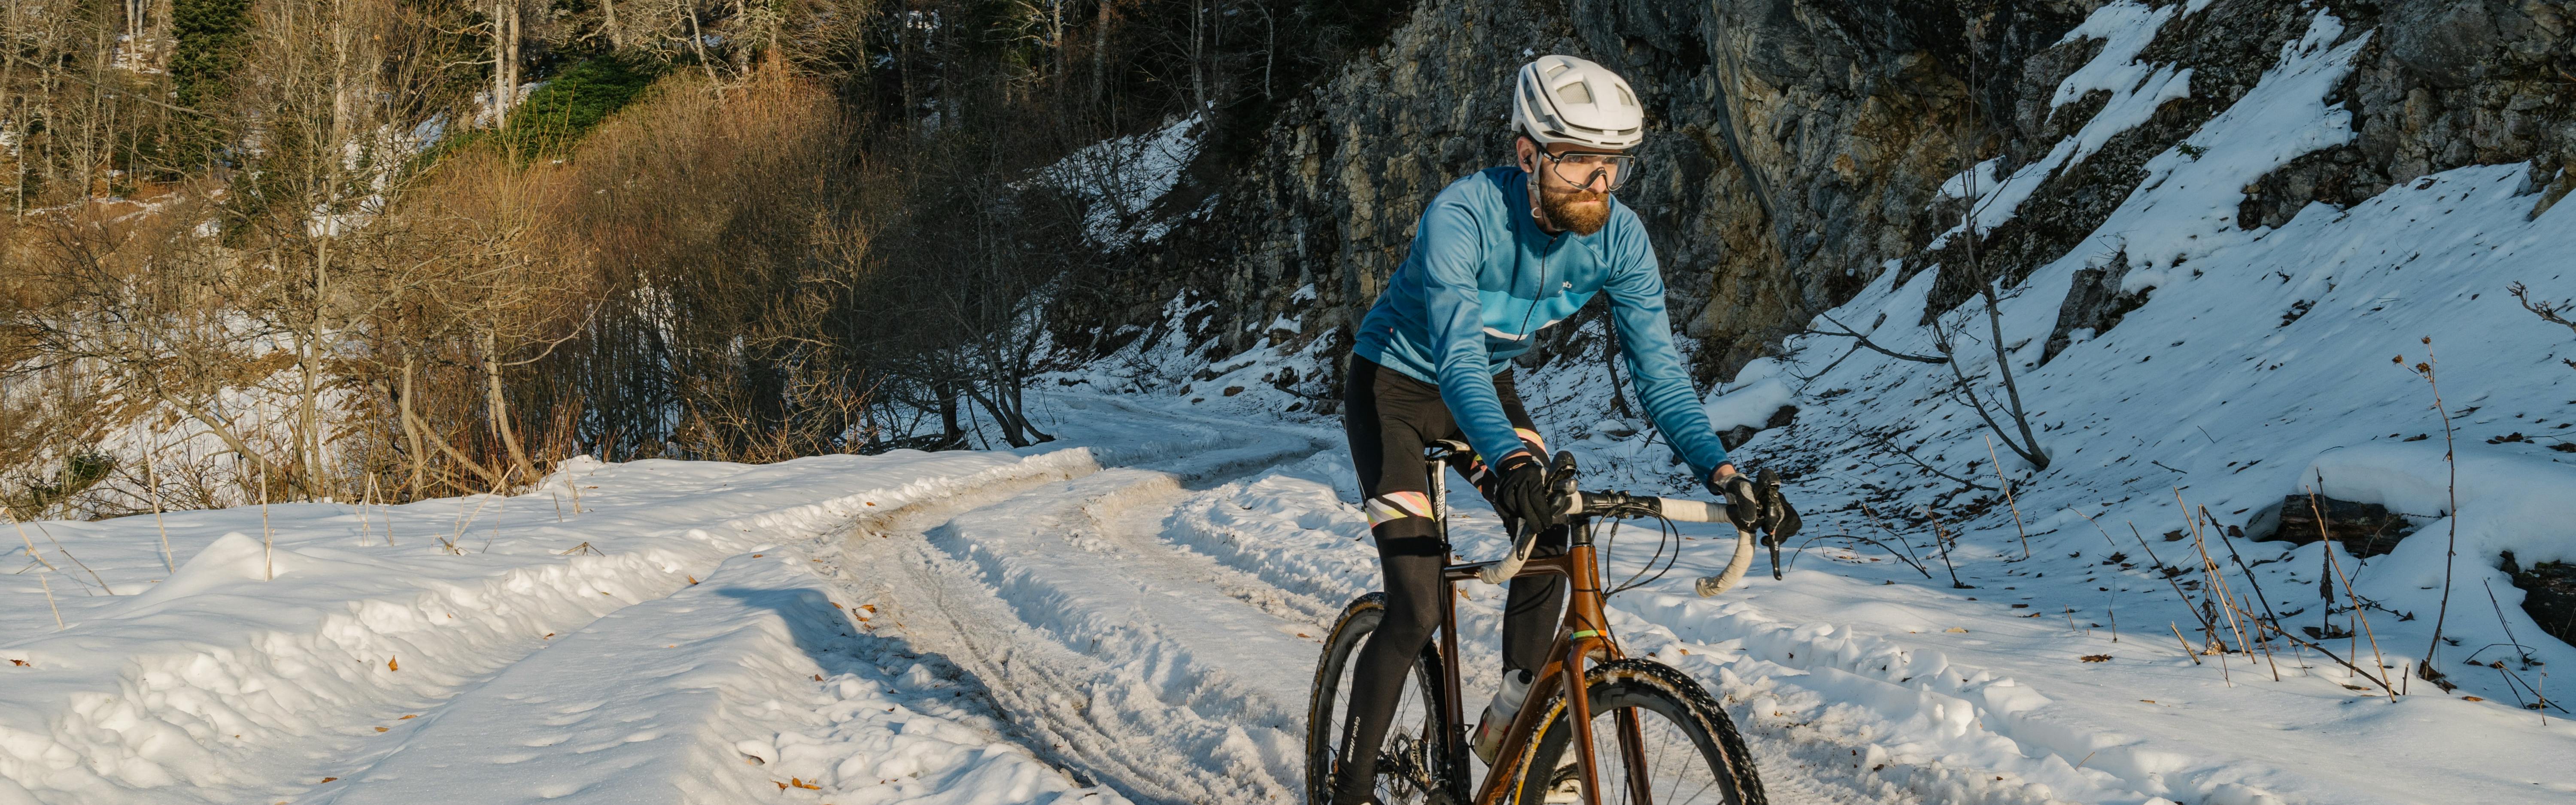 Bicycling Outdoors in Winter: Health Benefits and the Best Gear